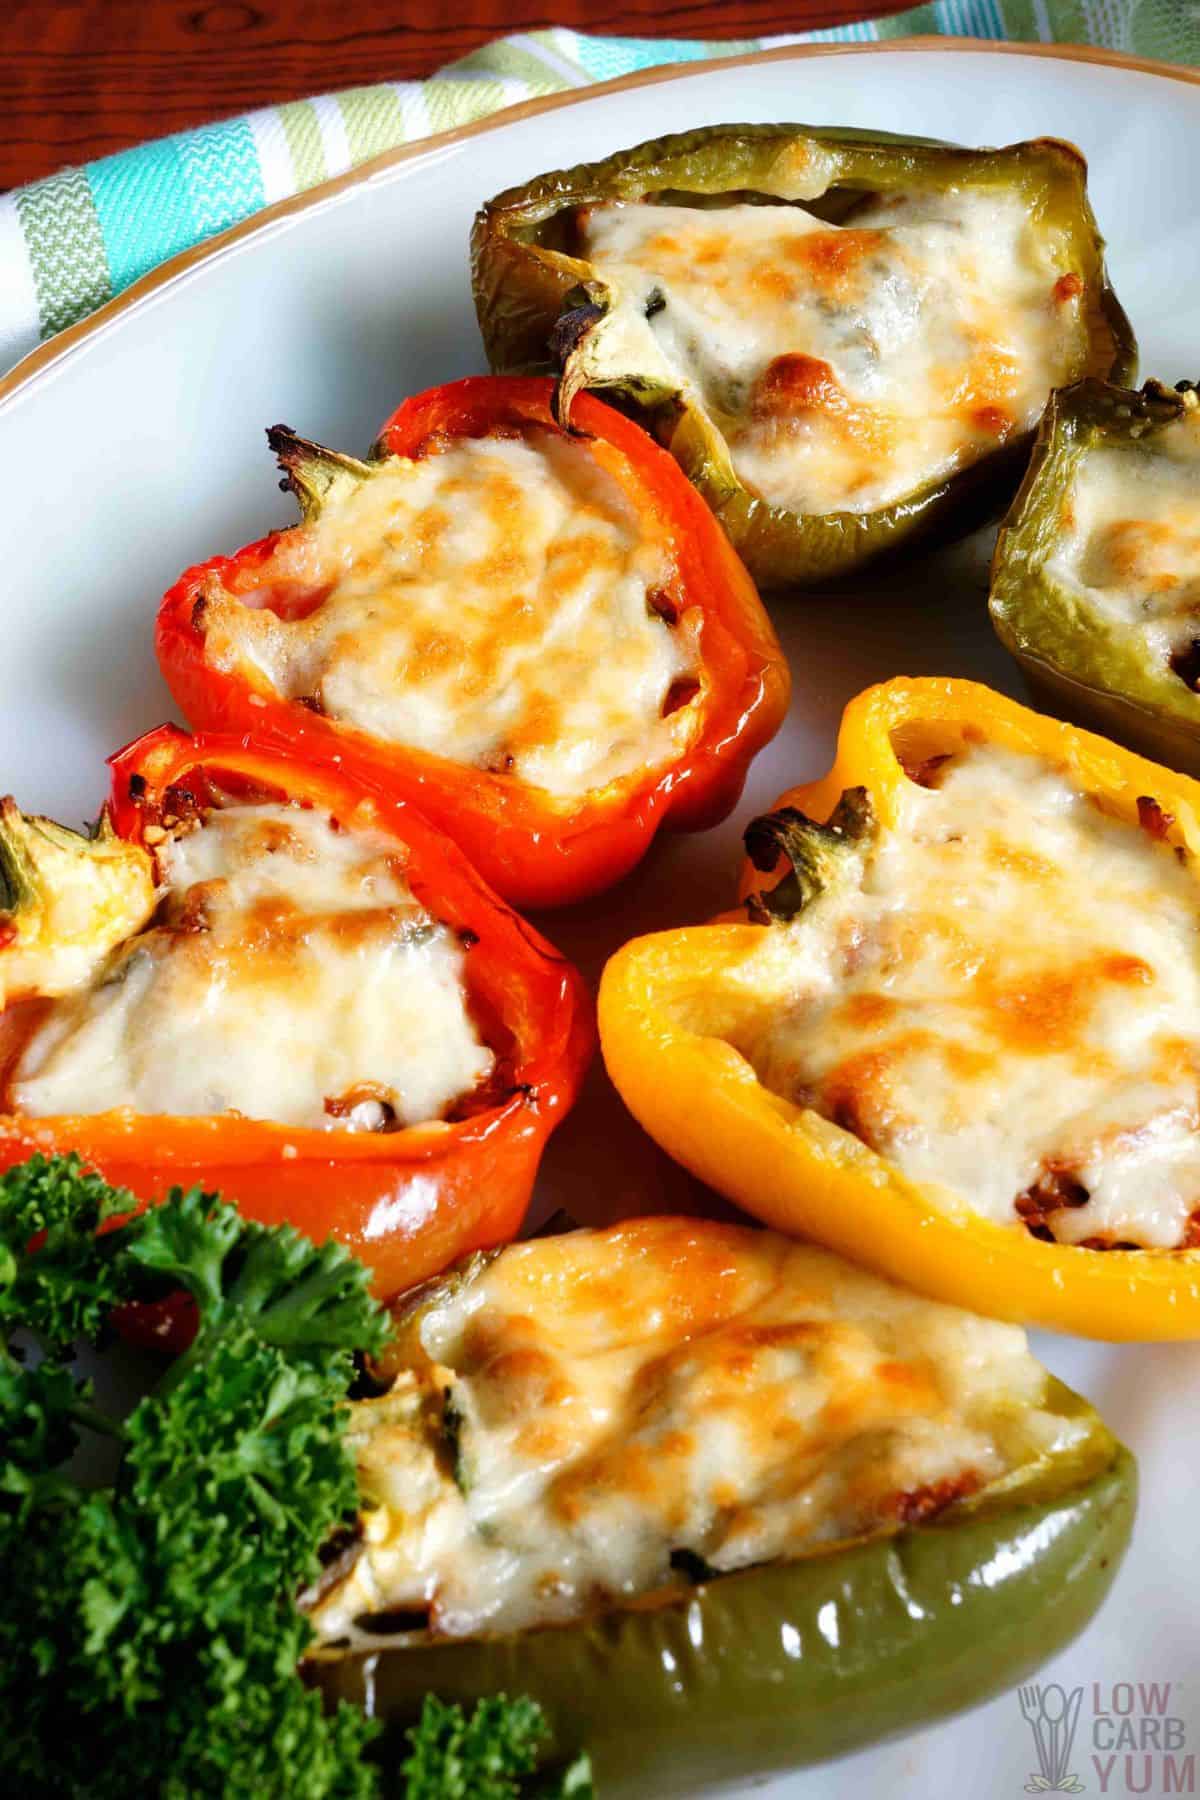 keto stuffed bell peppers are filled with pulled pork and cheese